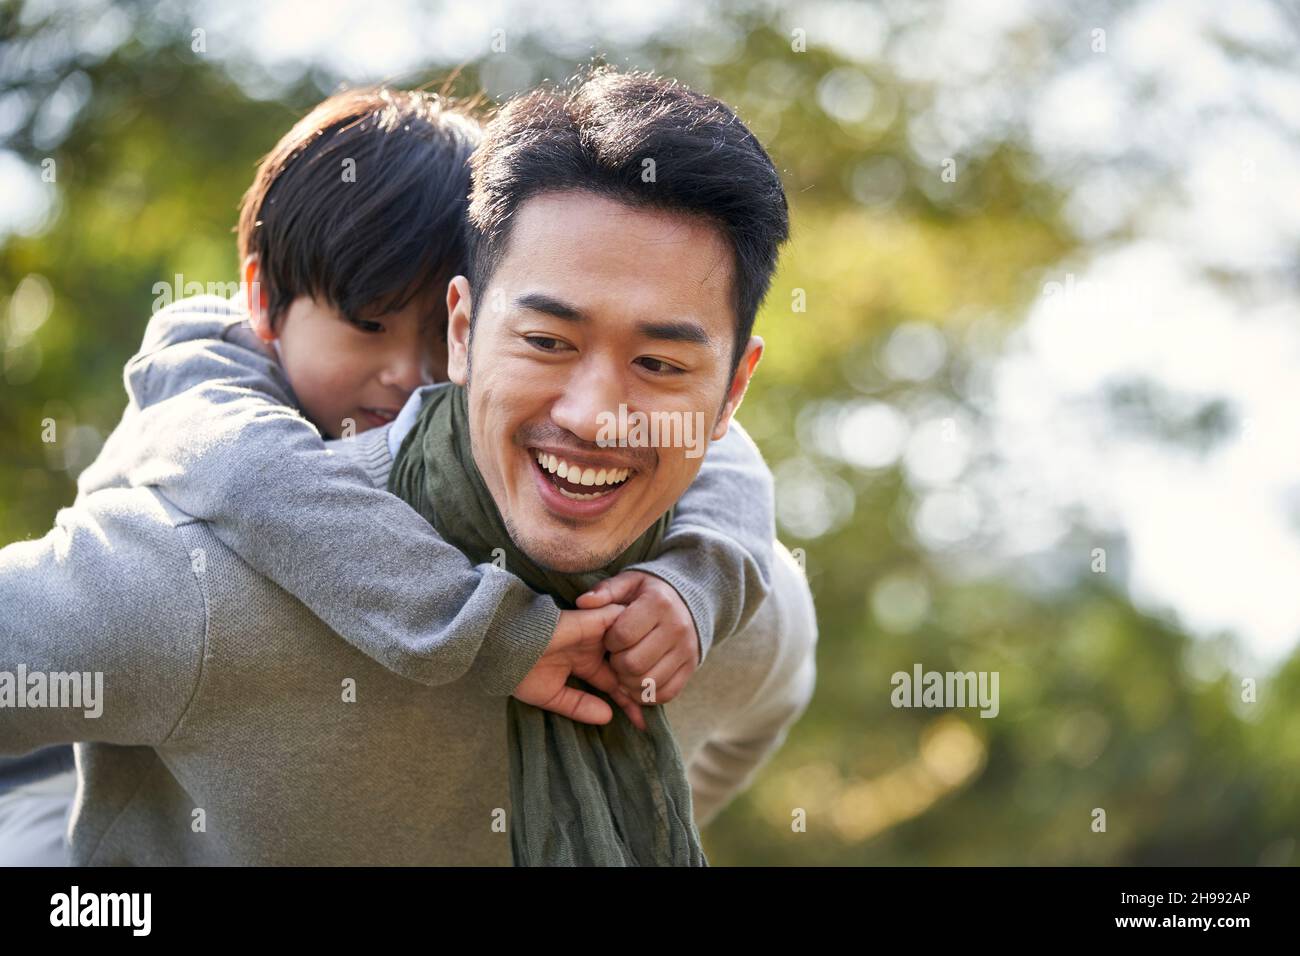 asian father carrying son on back having fun outdoors in park Stock Photo